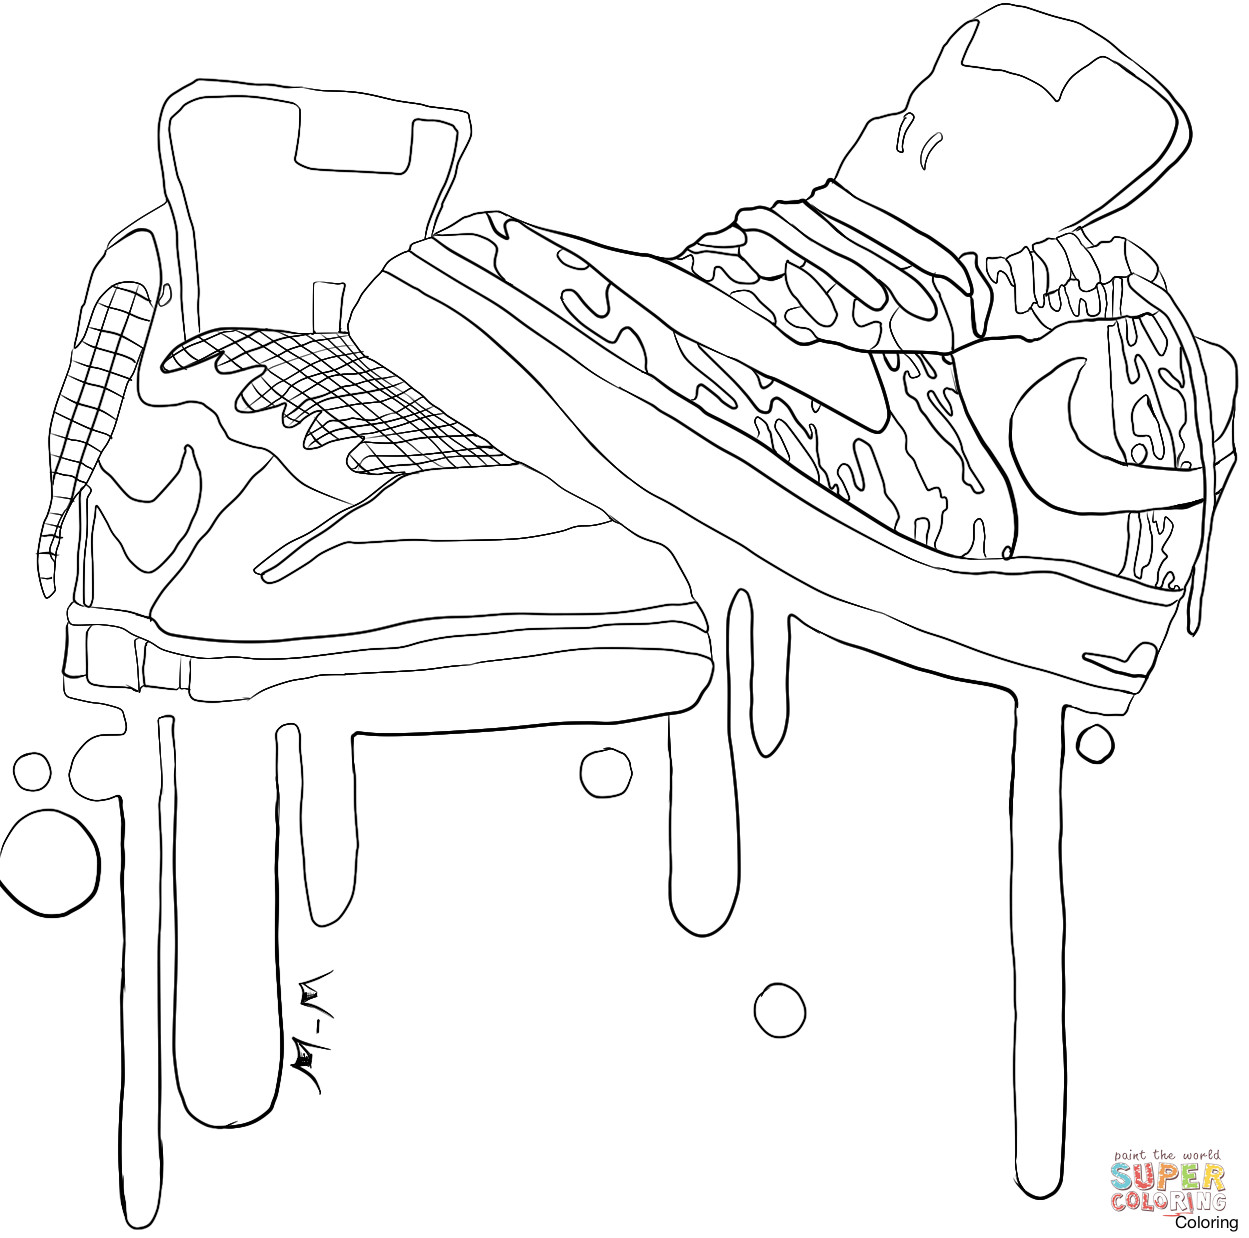 Nike Shoes Coloring Pages at GetColorings.com | Free printable ...